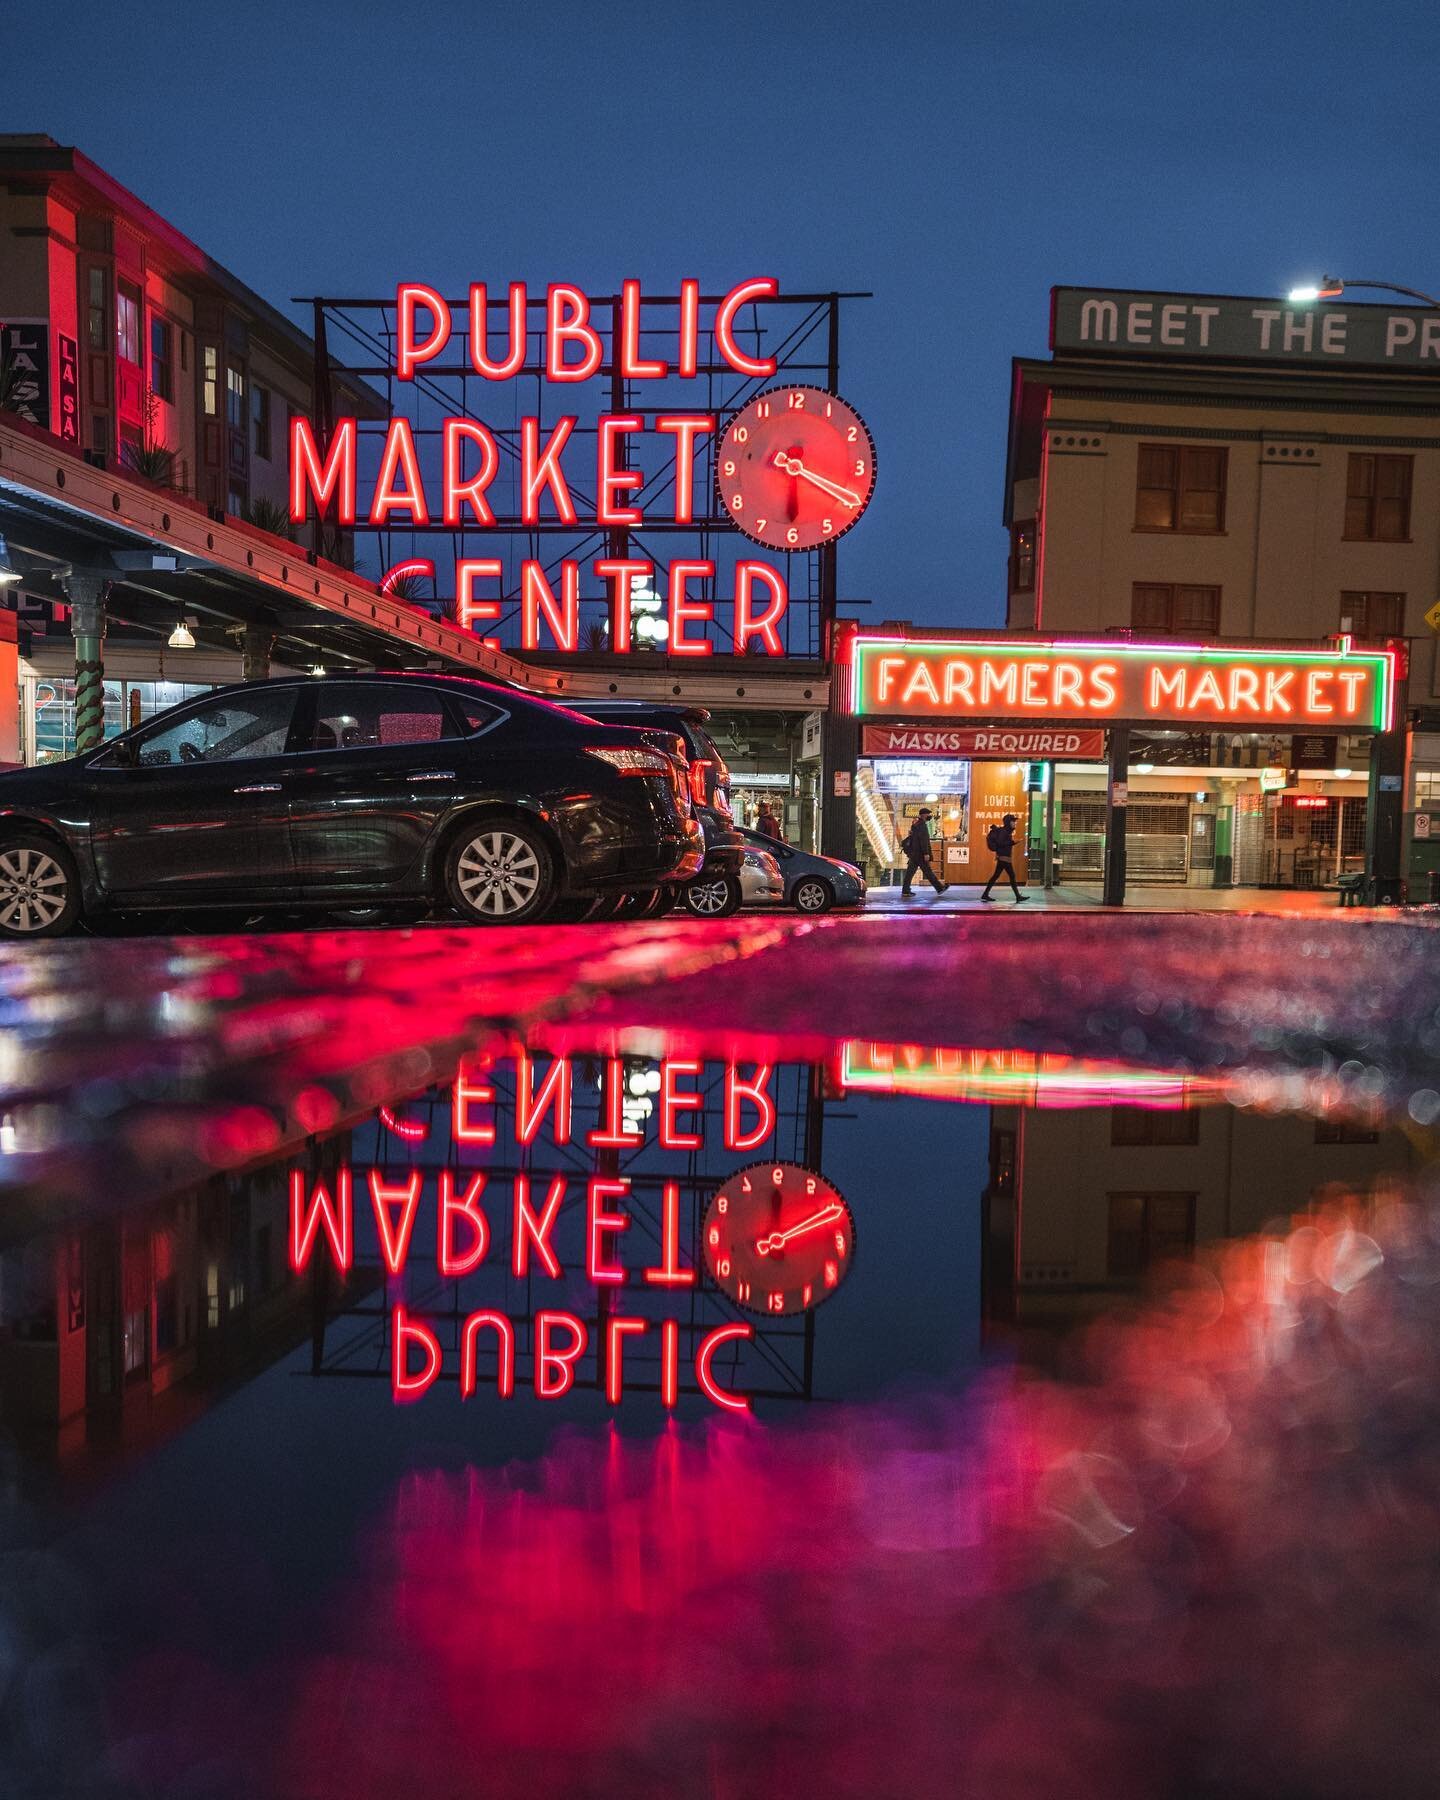 It&rsquo;s always fun cruising through the market on a rainy night. Which means an empty market and tons of puddles. 
.
.
.
.
#curiocityseattle #pnw_shooters #shooters #citykillerz #seattle_sites #night_owlz #seattle #pikeplacemarket #shotz_fired #ni